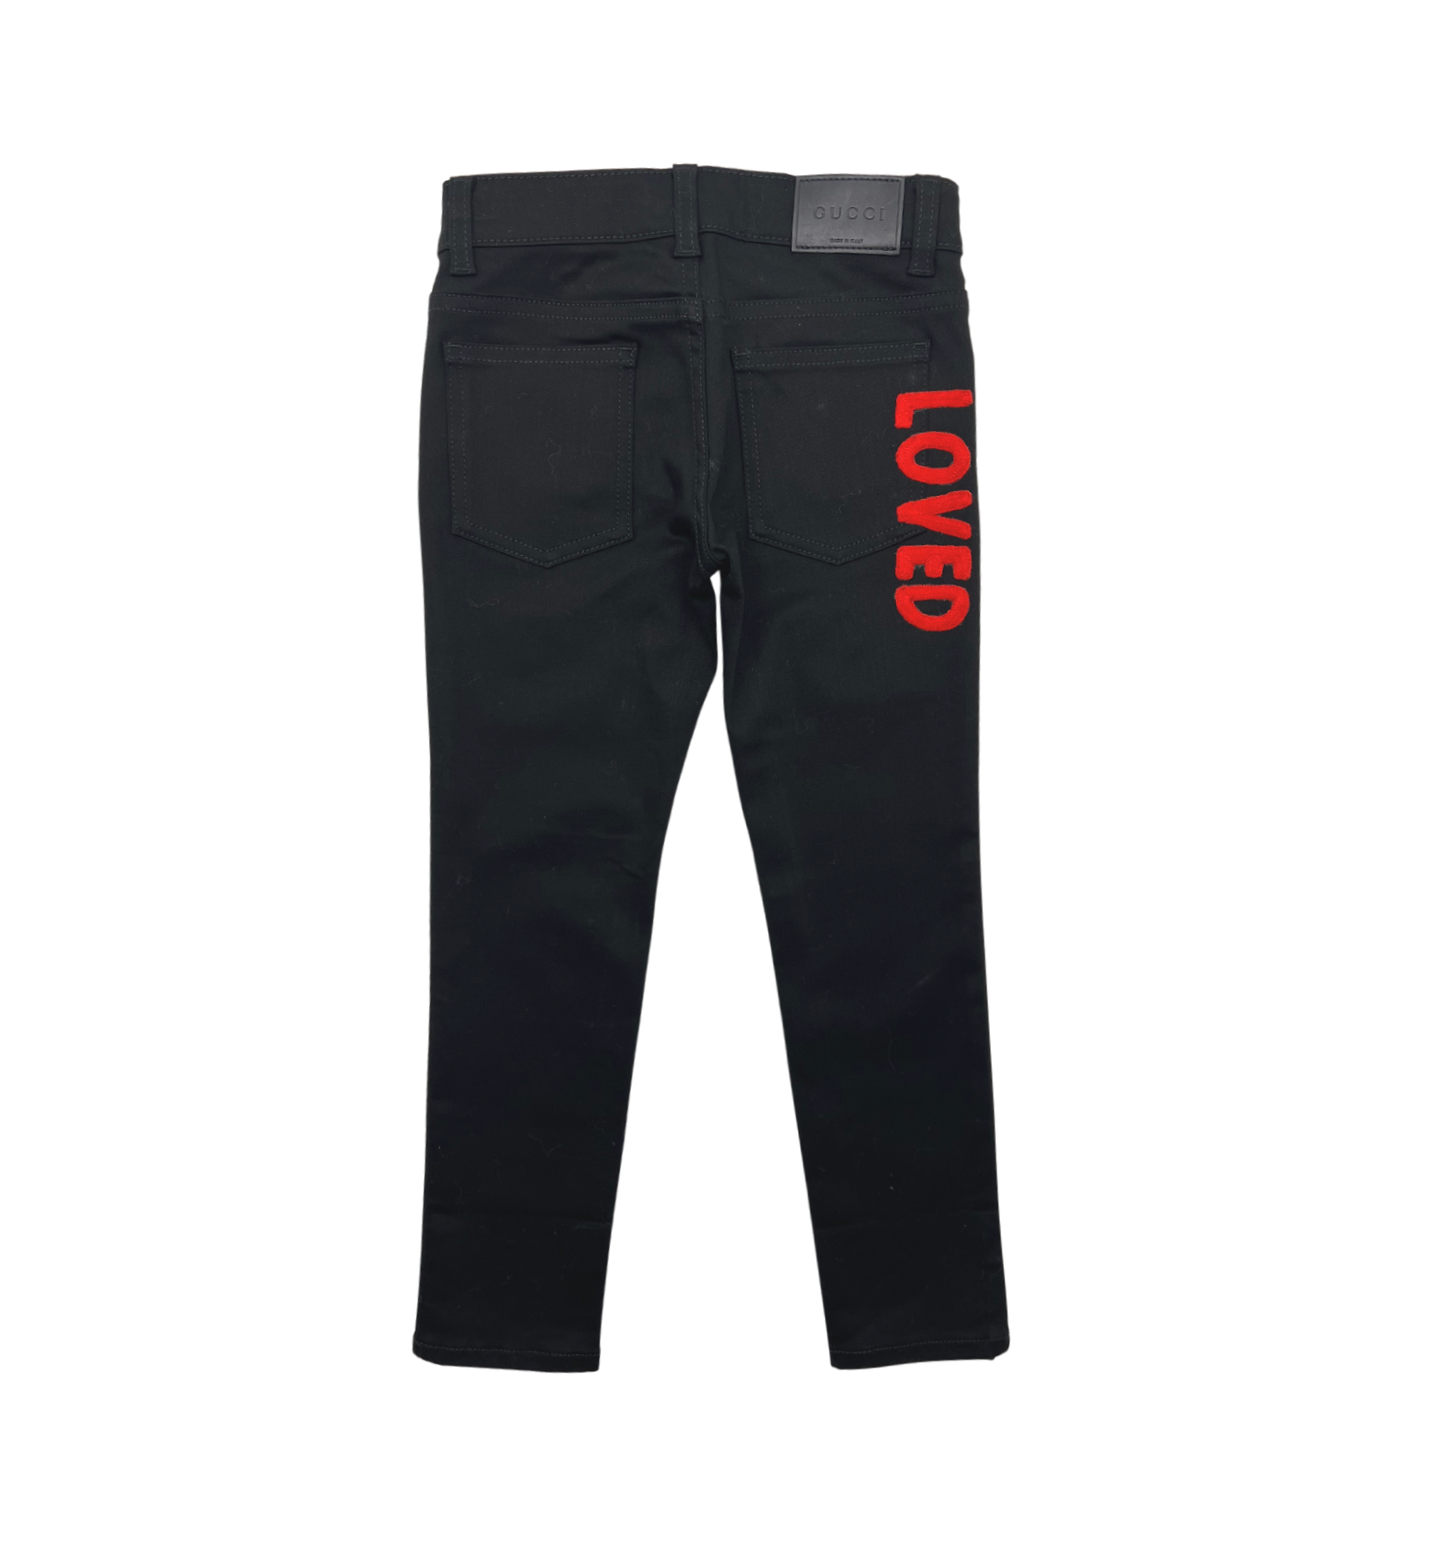 GUCCI - Embroidered "loved" black jeans - 6 years old